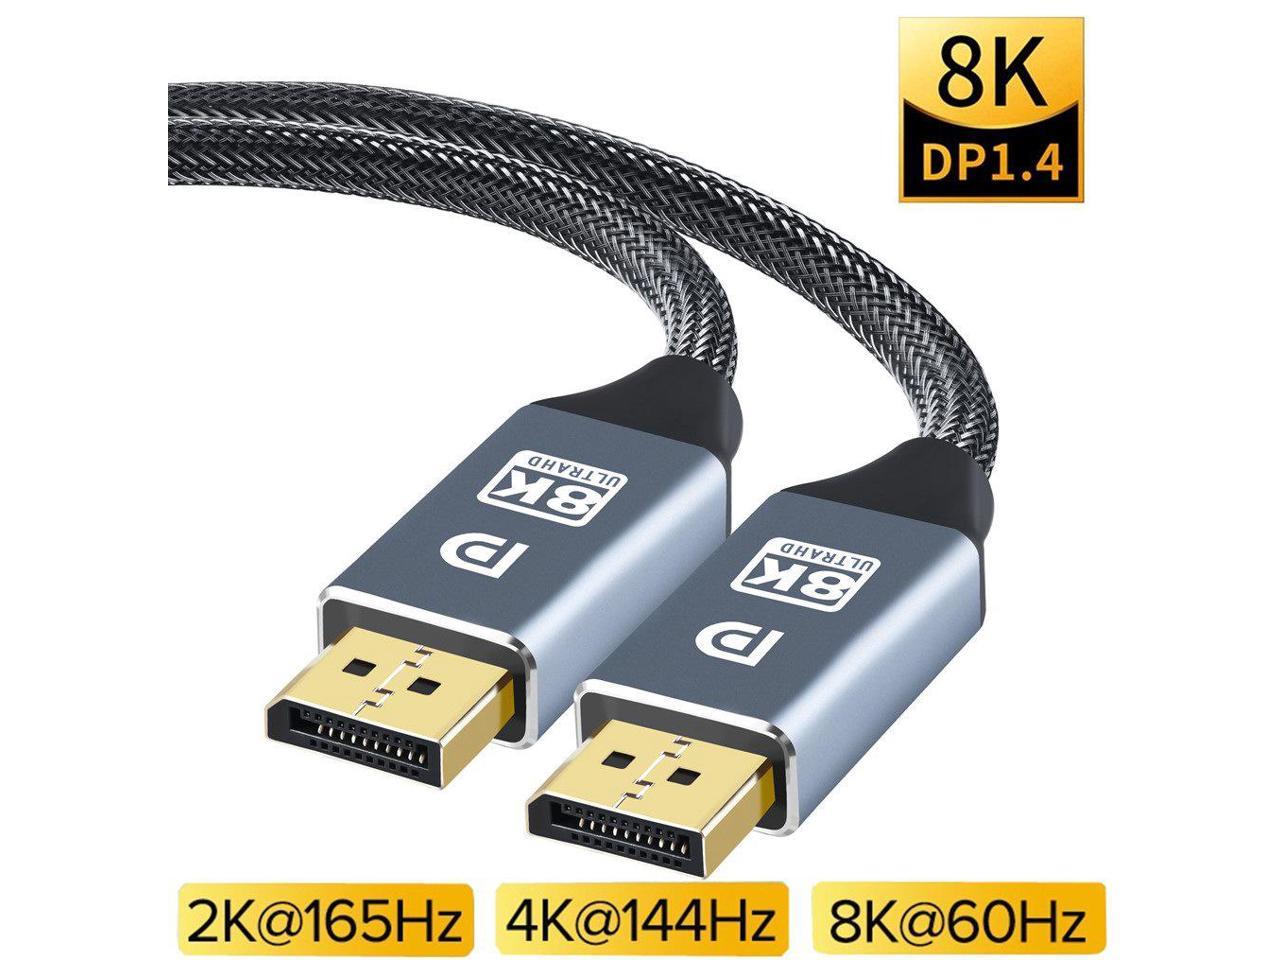 CABLEDECONN DisplayPort Ultra HD 8K 4K Copper Cord DP 1.4 8K@60Hz 4K@144Hz High Speed 32.4Gbps 3D Slim and Flexible DP to DP Cable with LED Indication 1m 3.3ft 